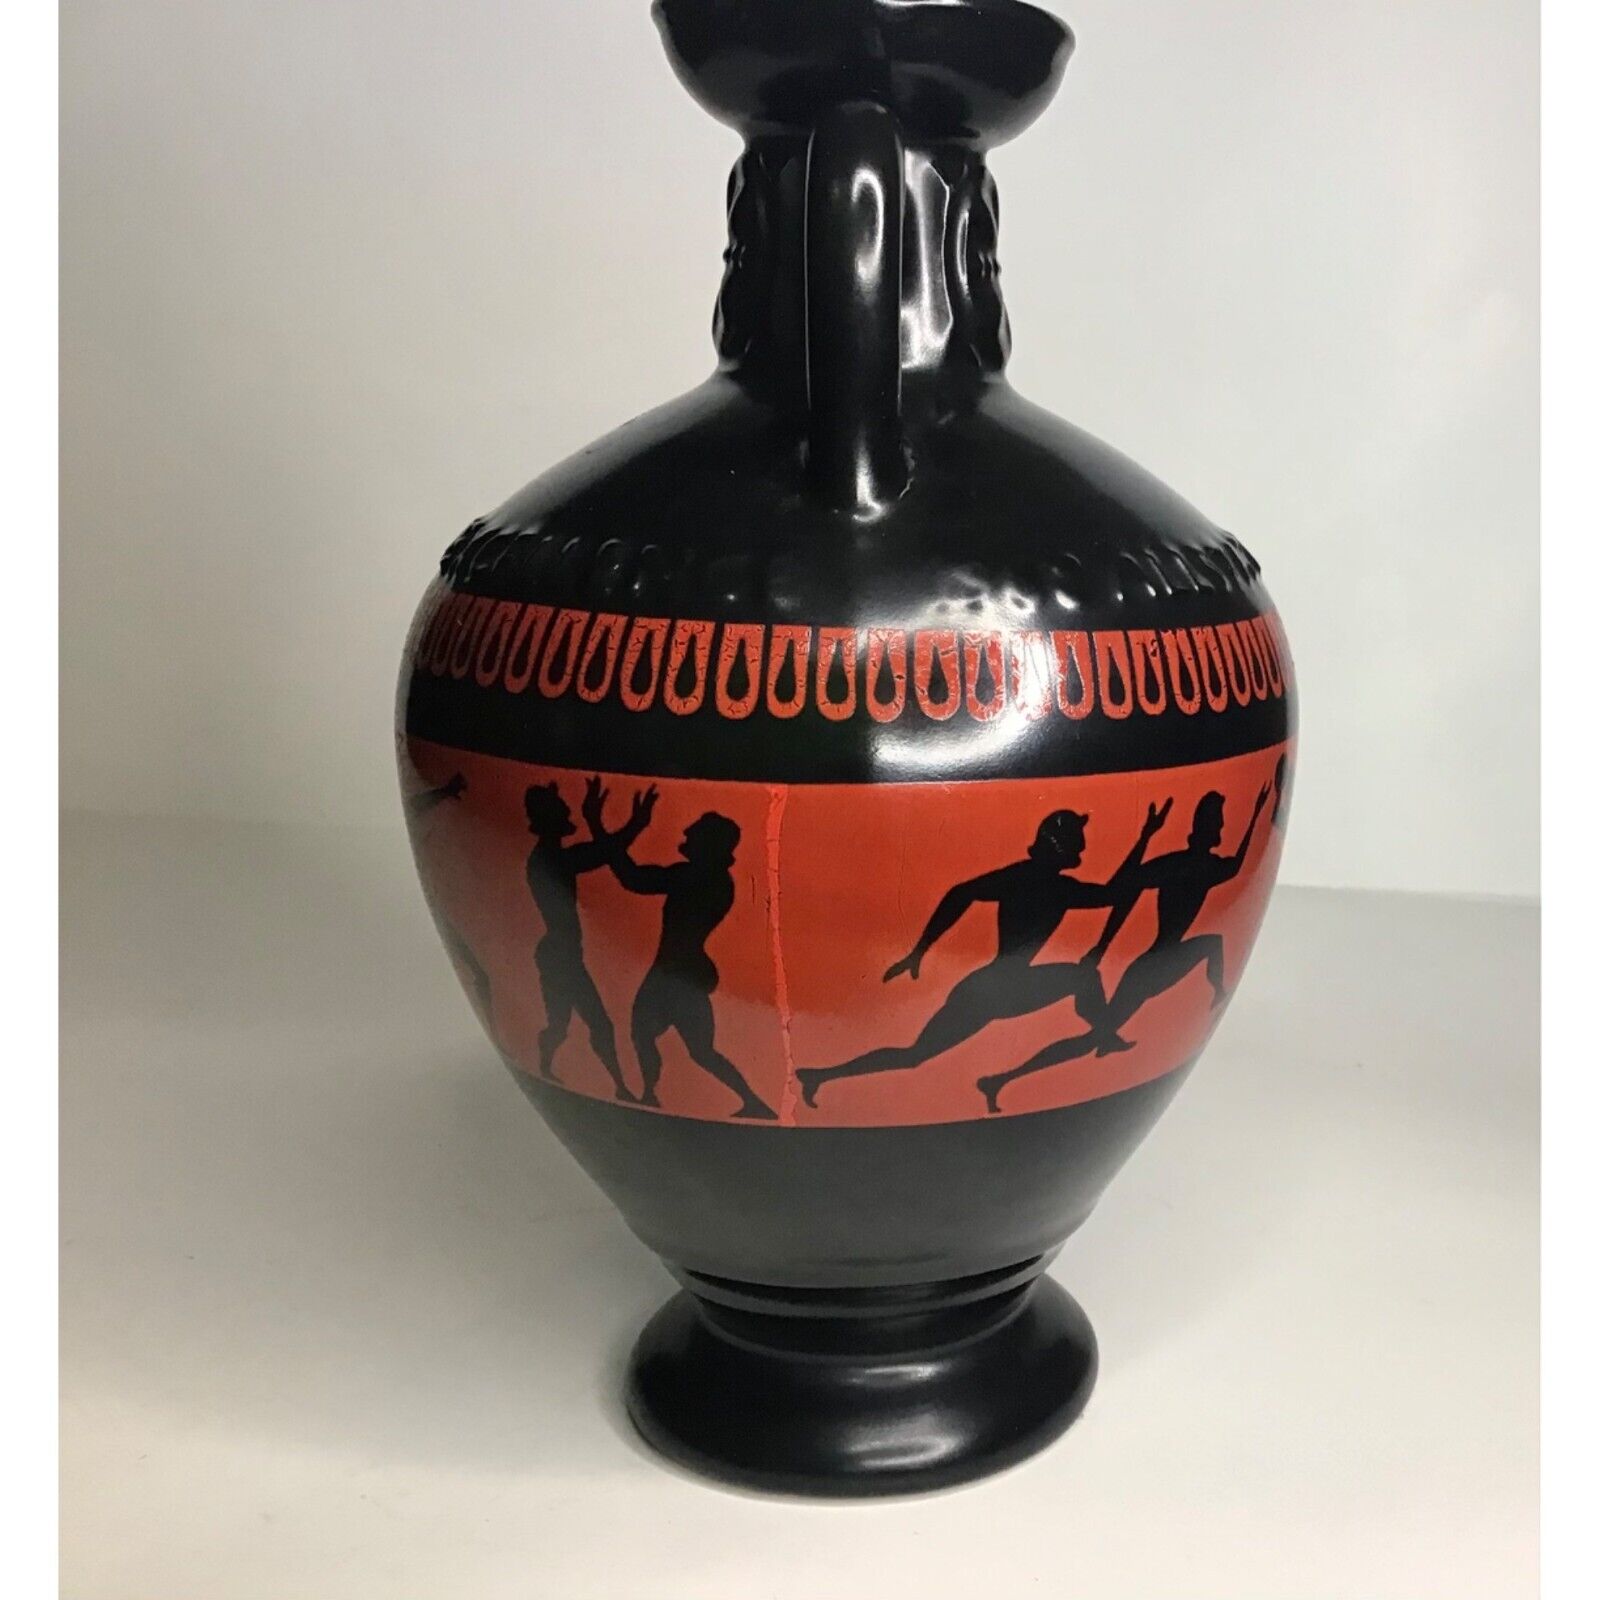 Vintage Amphora Urn Vase 1968 Allstate Life Olympics A Tradition of Excellence.